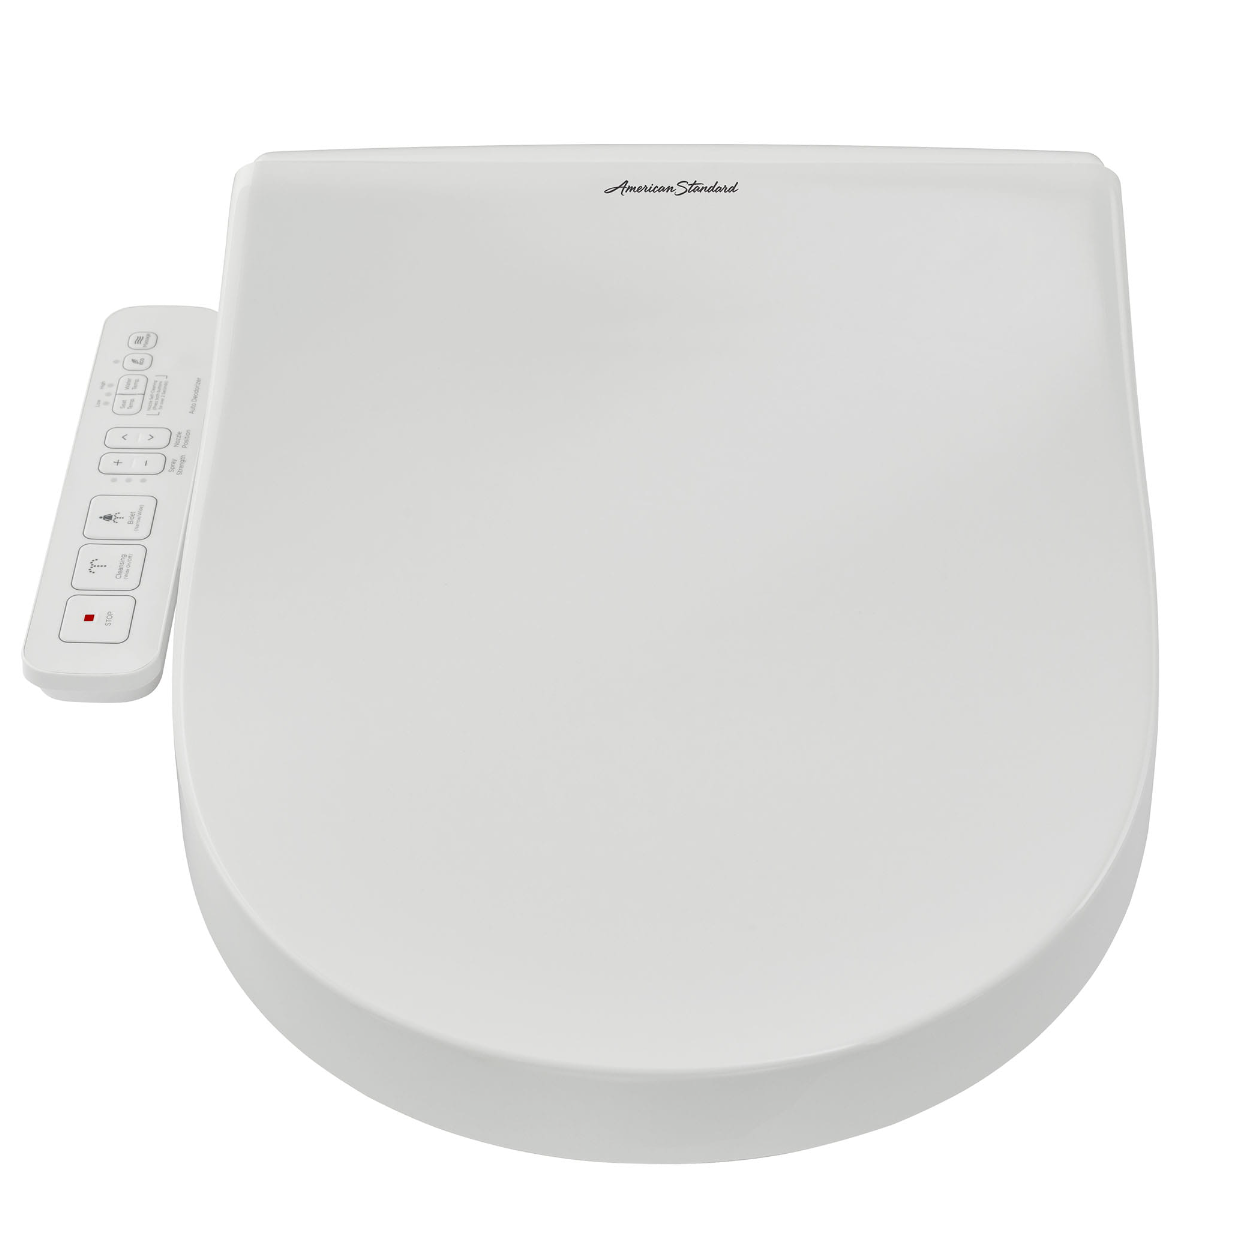 American Standard Advanced Clean 1.0 Electric SpaLet Bidet Seat With Side Panel Operation - Elongated